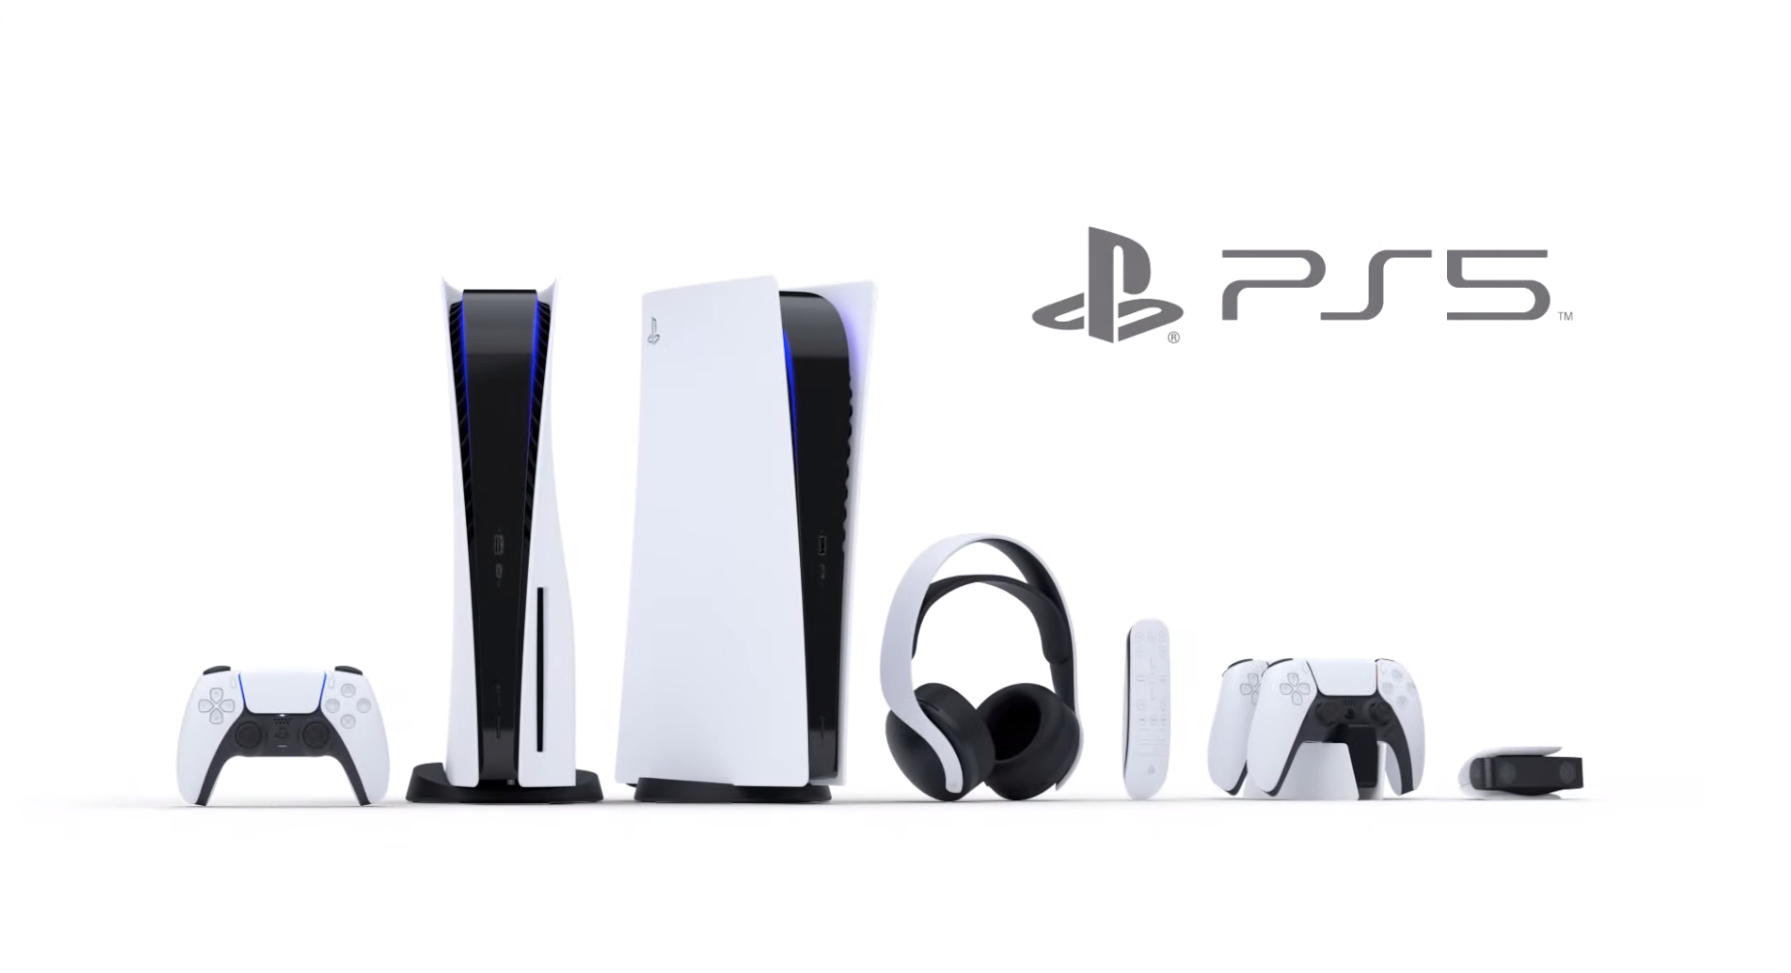 Why does PlayStation 5 disappear in an instant and sell for 3 times its price?